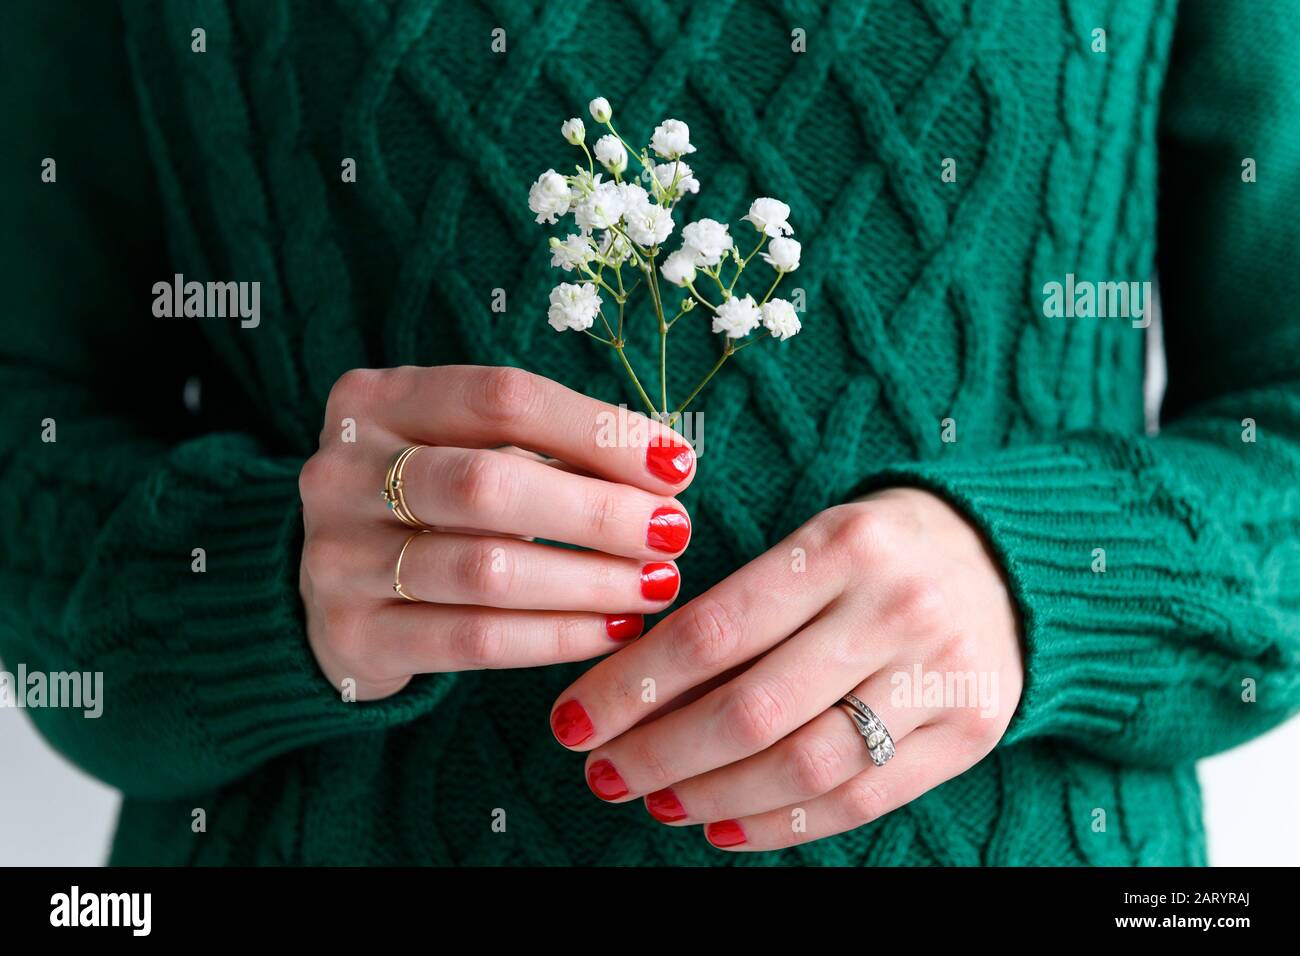 Woman wearing green holding white flowers Stock Photo